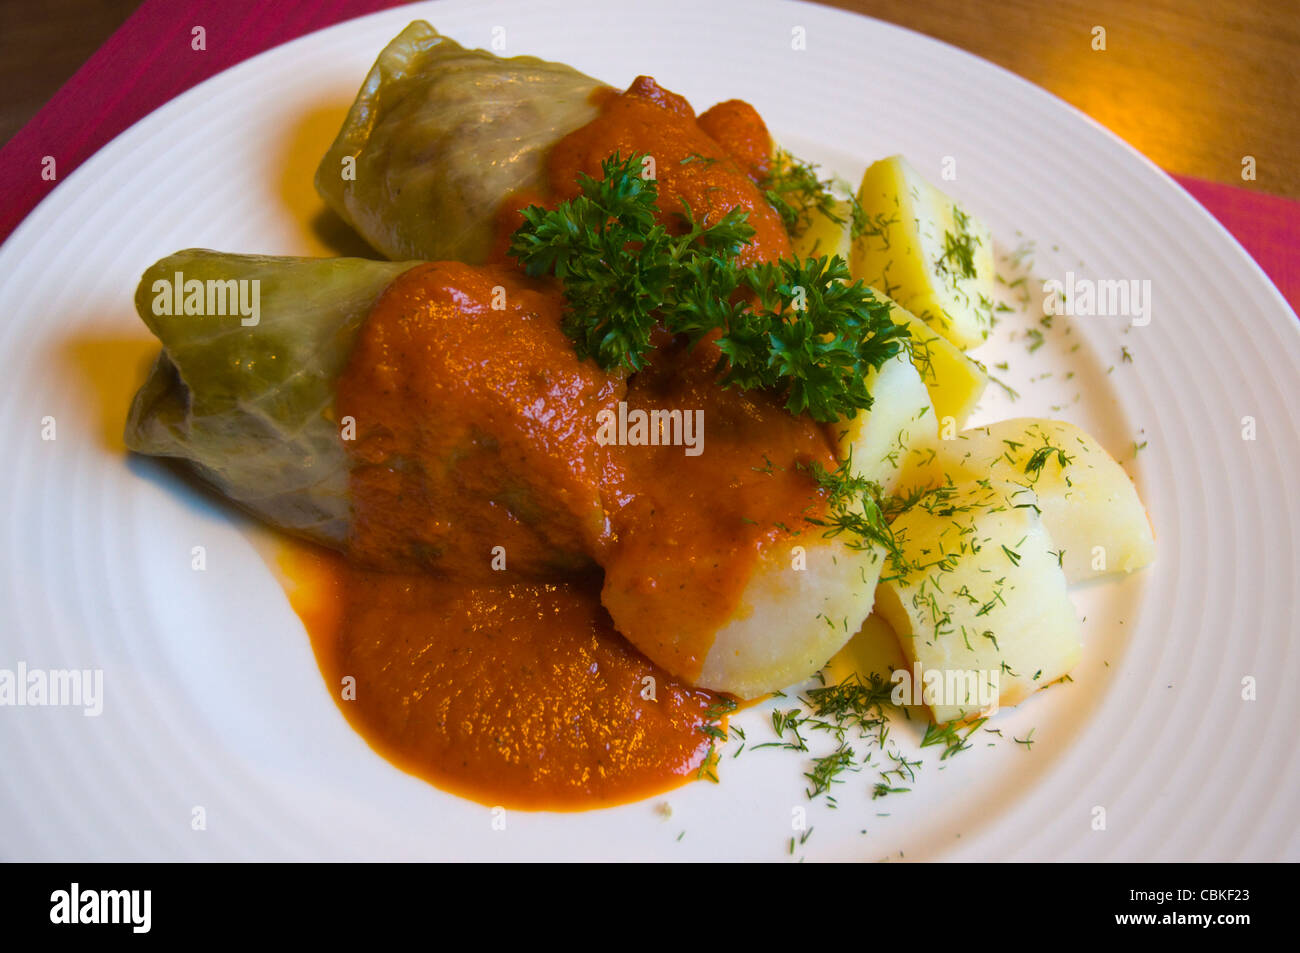 Polish cuisine of Cabbage rolls and boiled potatoes in Tekstylia restaurant old town Gdansk Pomeriania northern Poland Europe Stock Photo